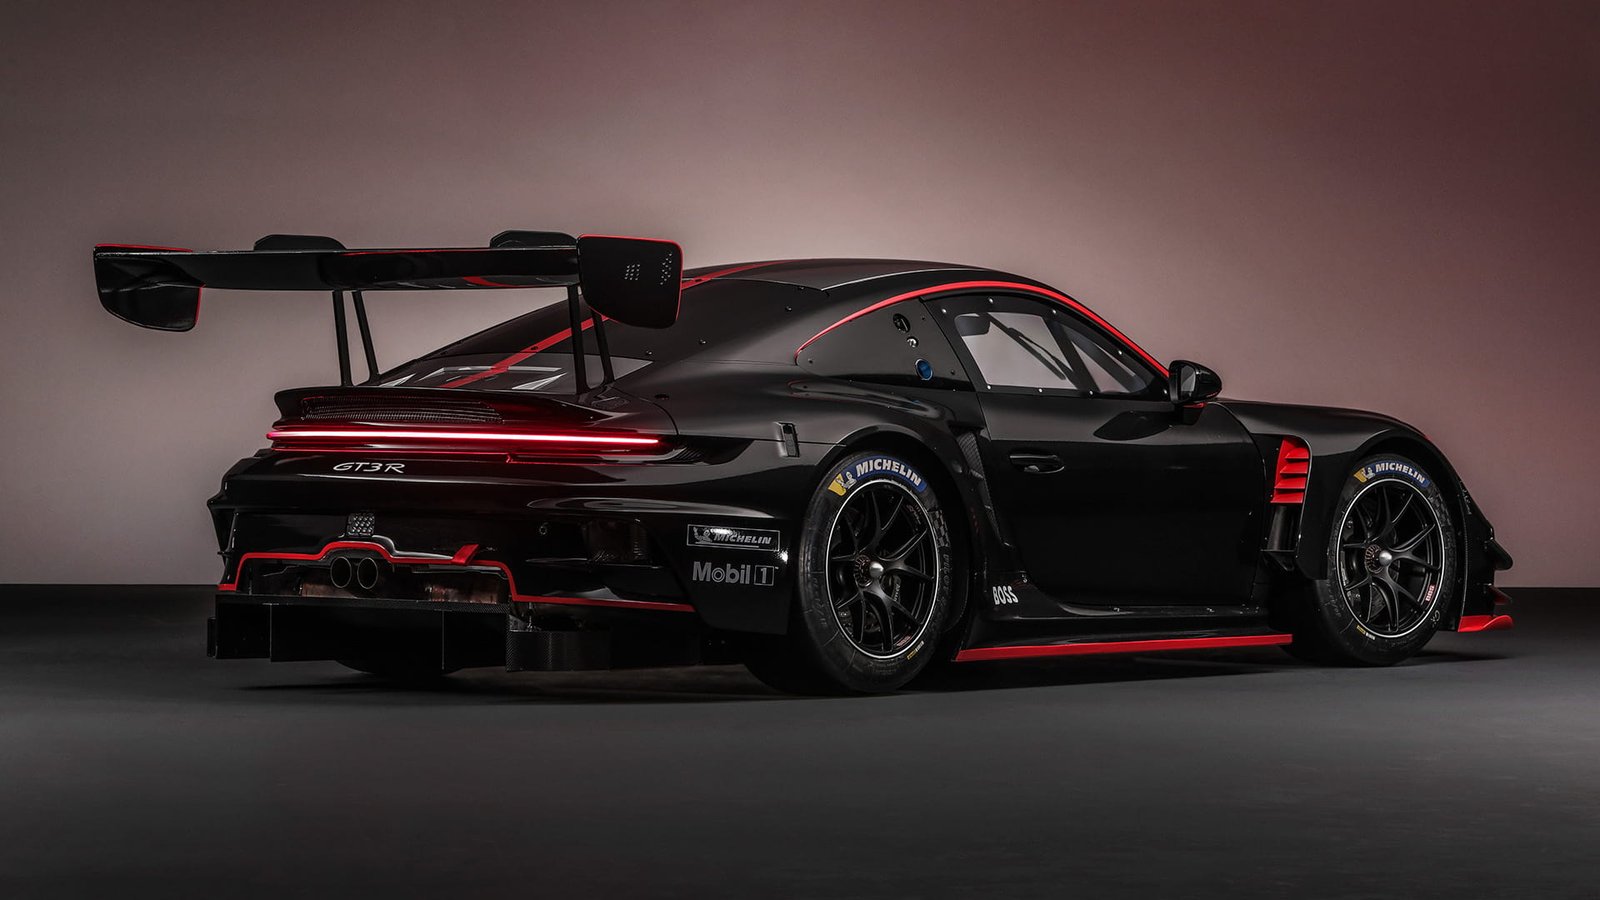 The new 911 GT3 R